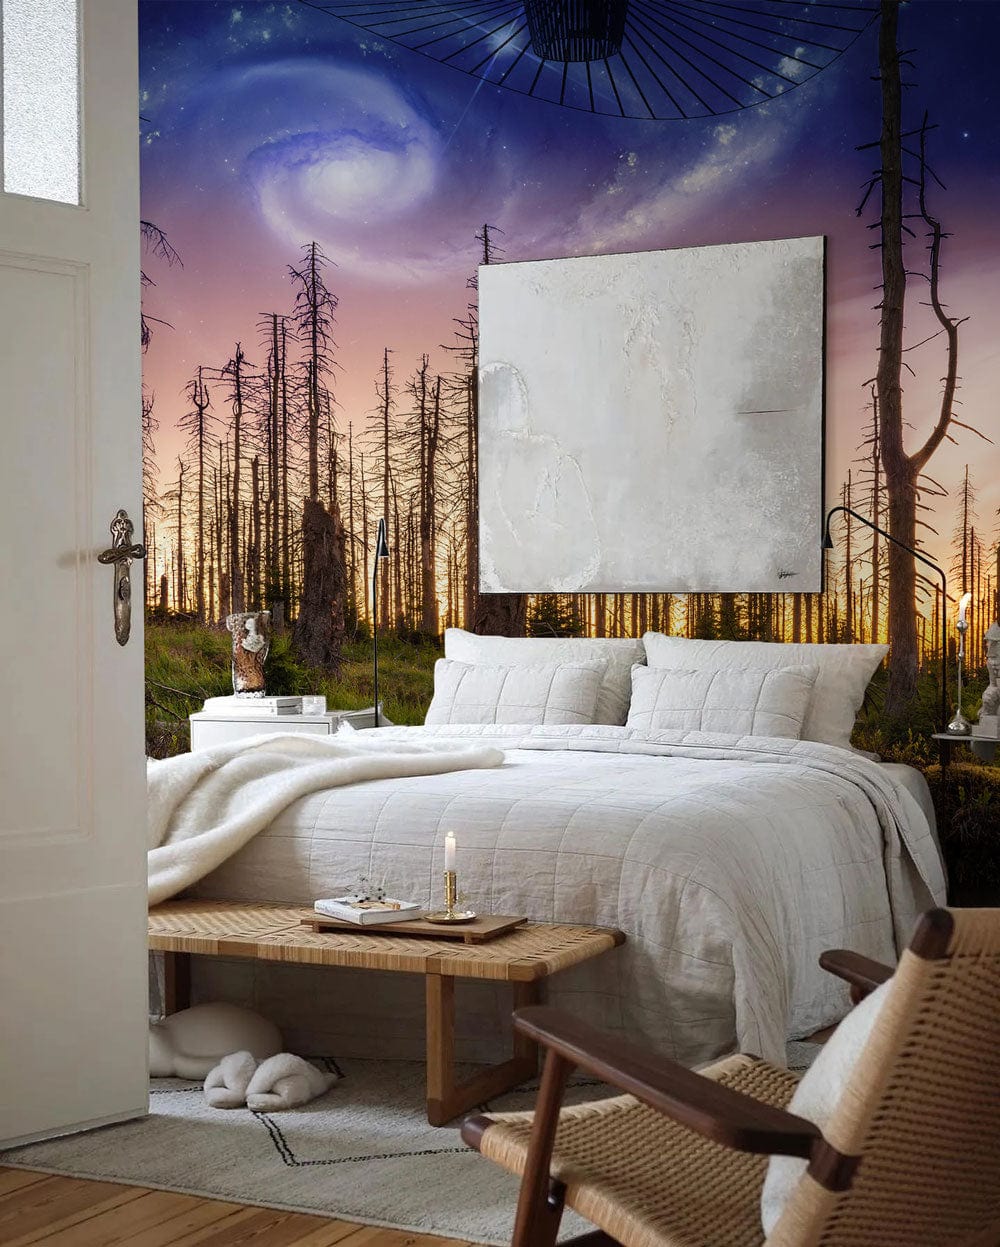 Wall Mural of Enchanted Forest to Add Mystique to Your Bedroom